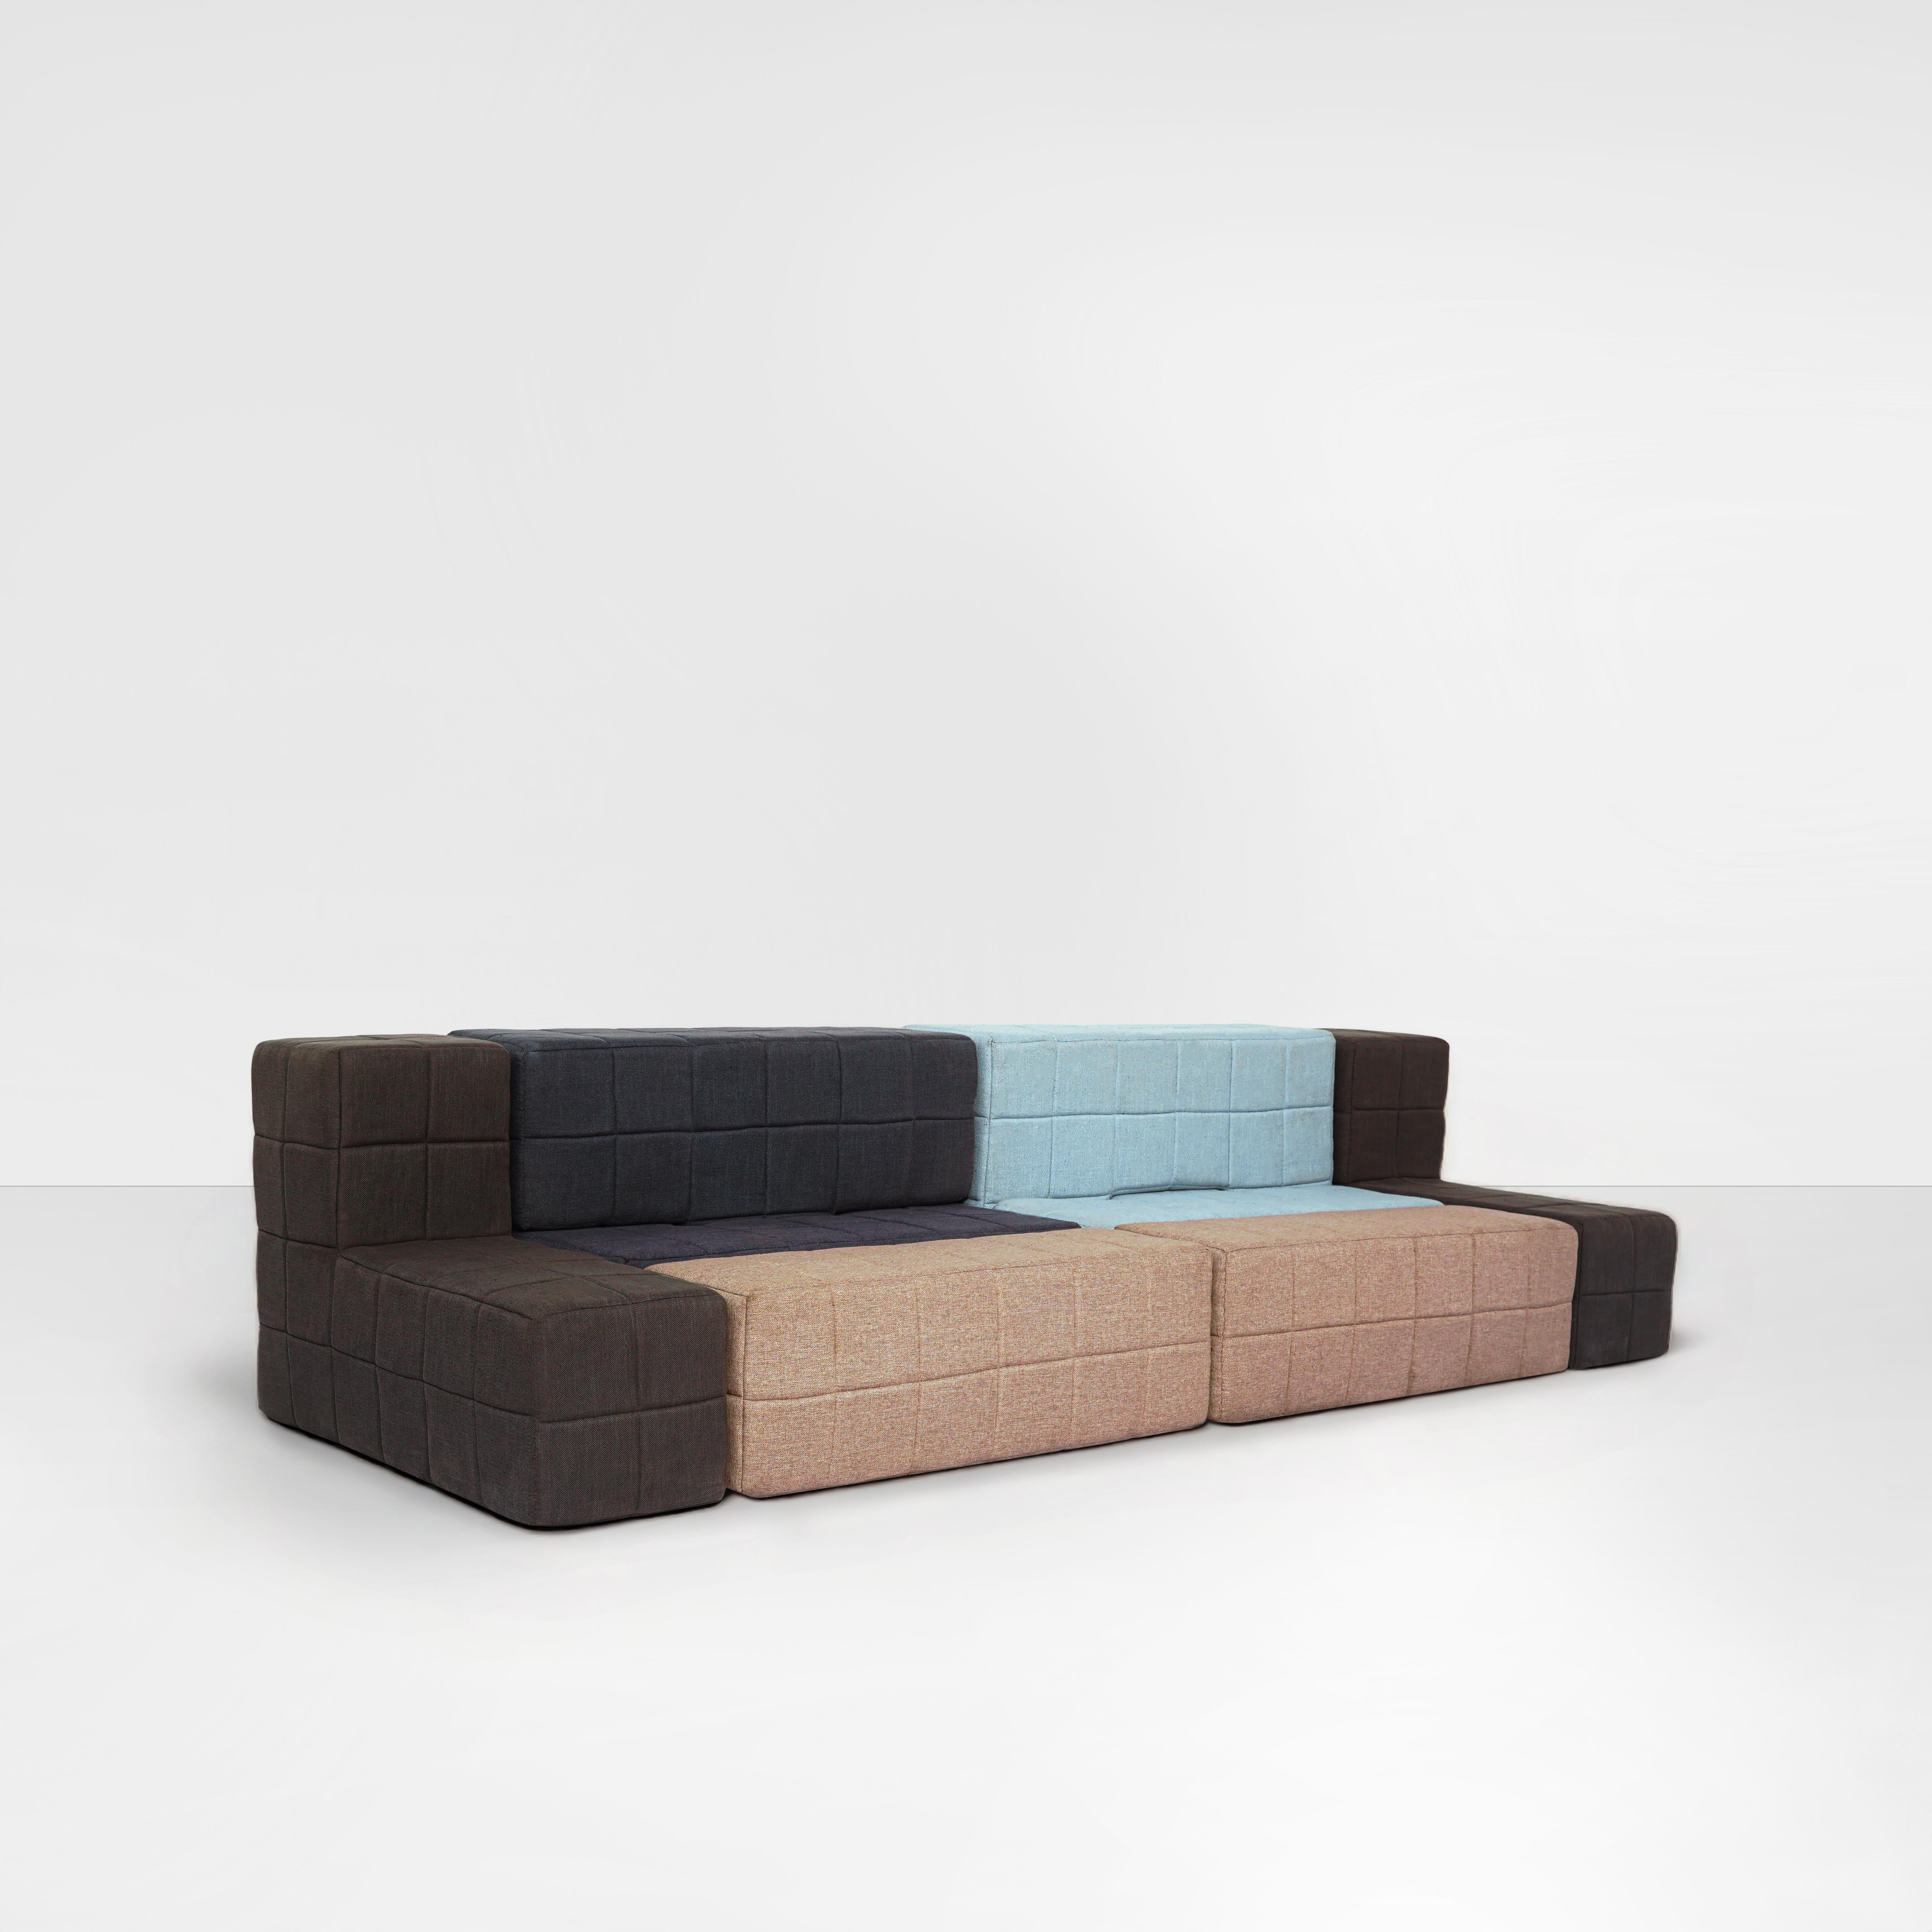 Contemporary New, Geometric, transitional, bold, art, modern sectional, modular For Sale